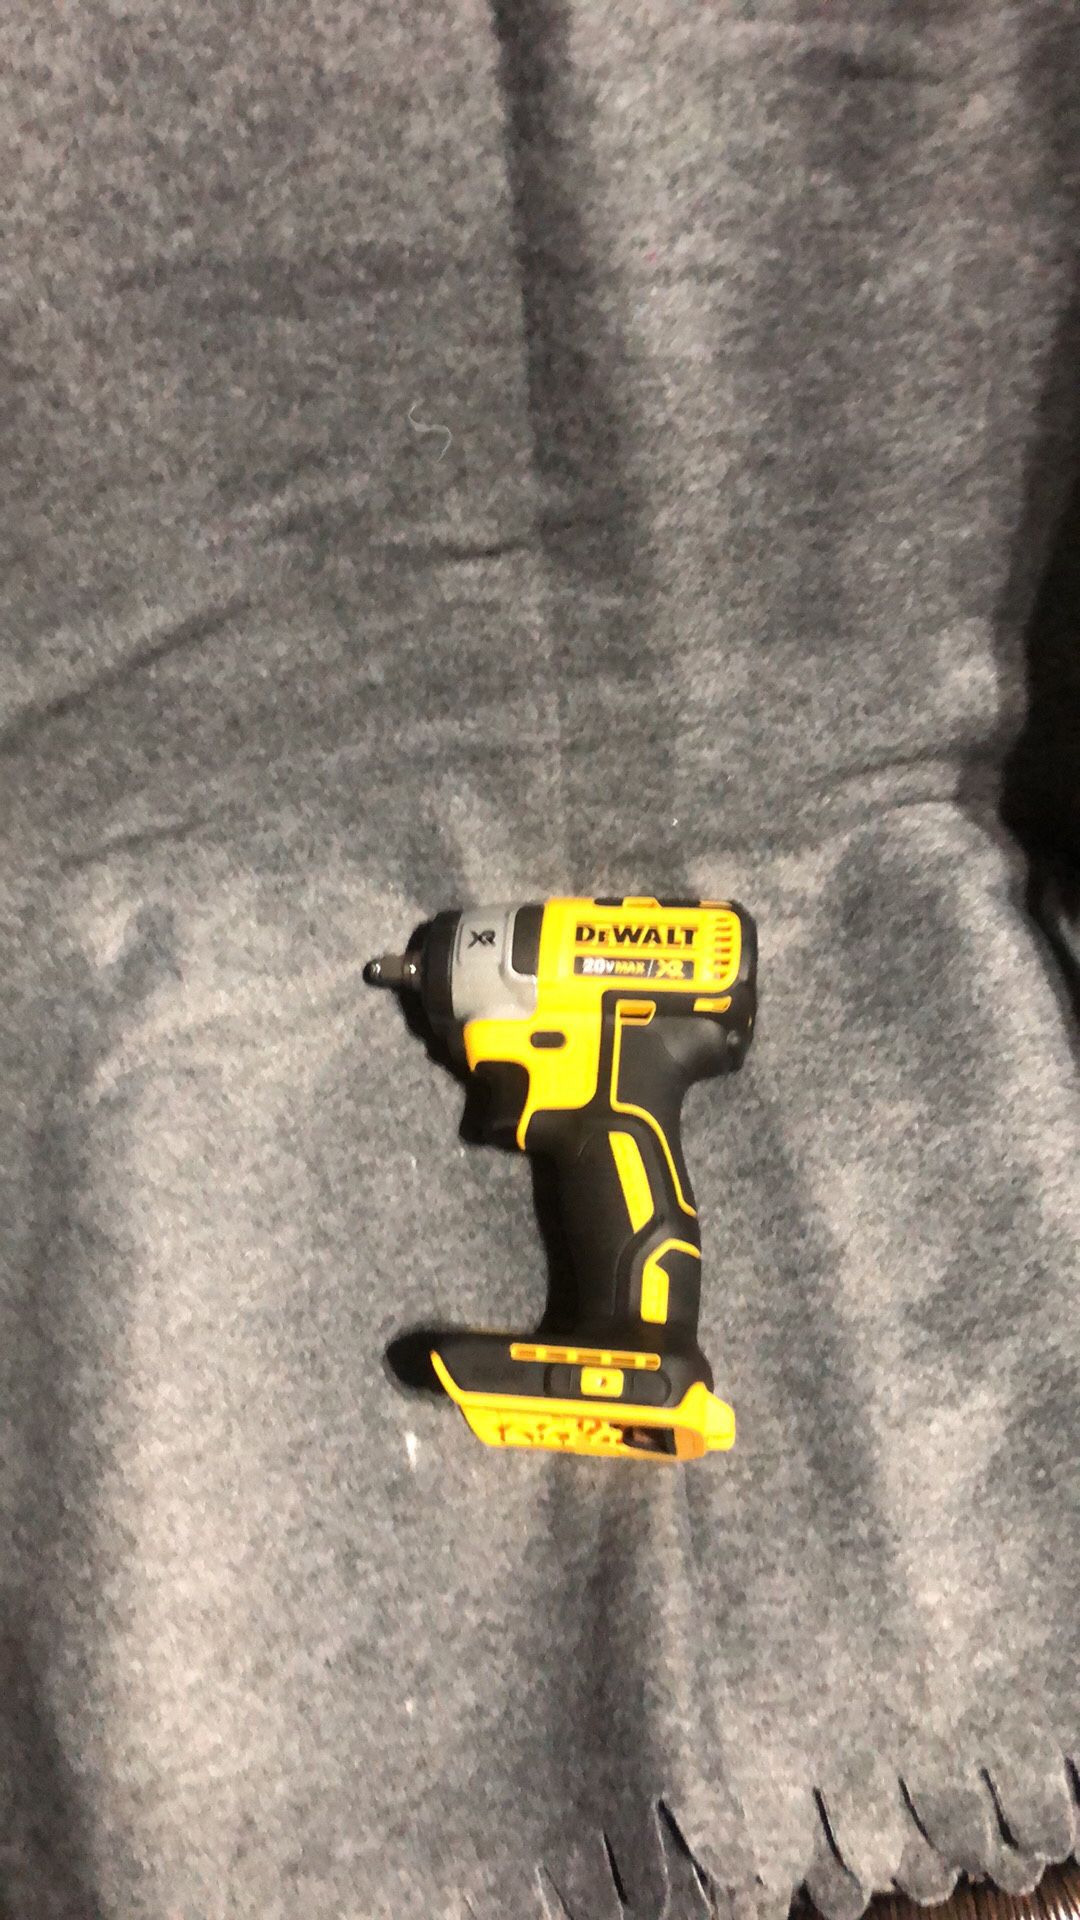 New Dewalt impact wrench 3/8 tool only